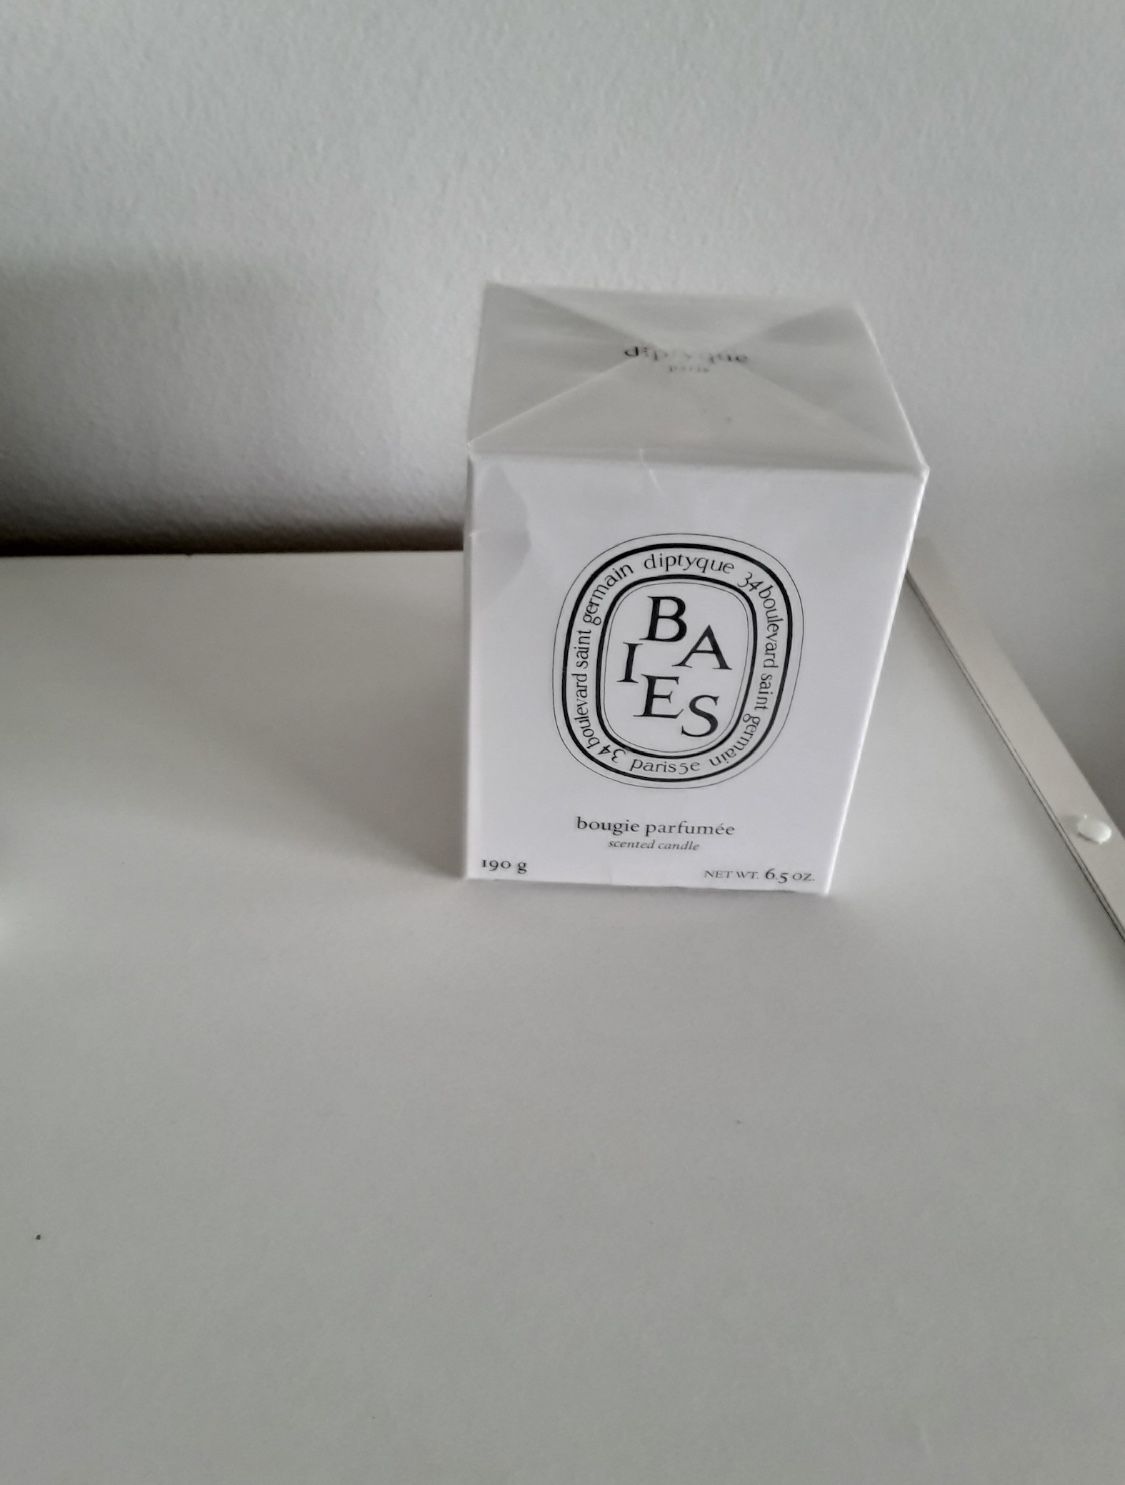 New in Box B A I E S  Bougie Parfumee Scented Candle